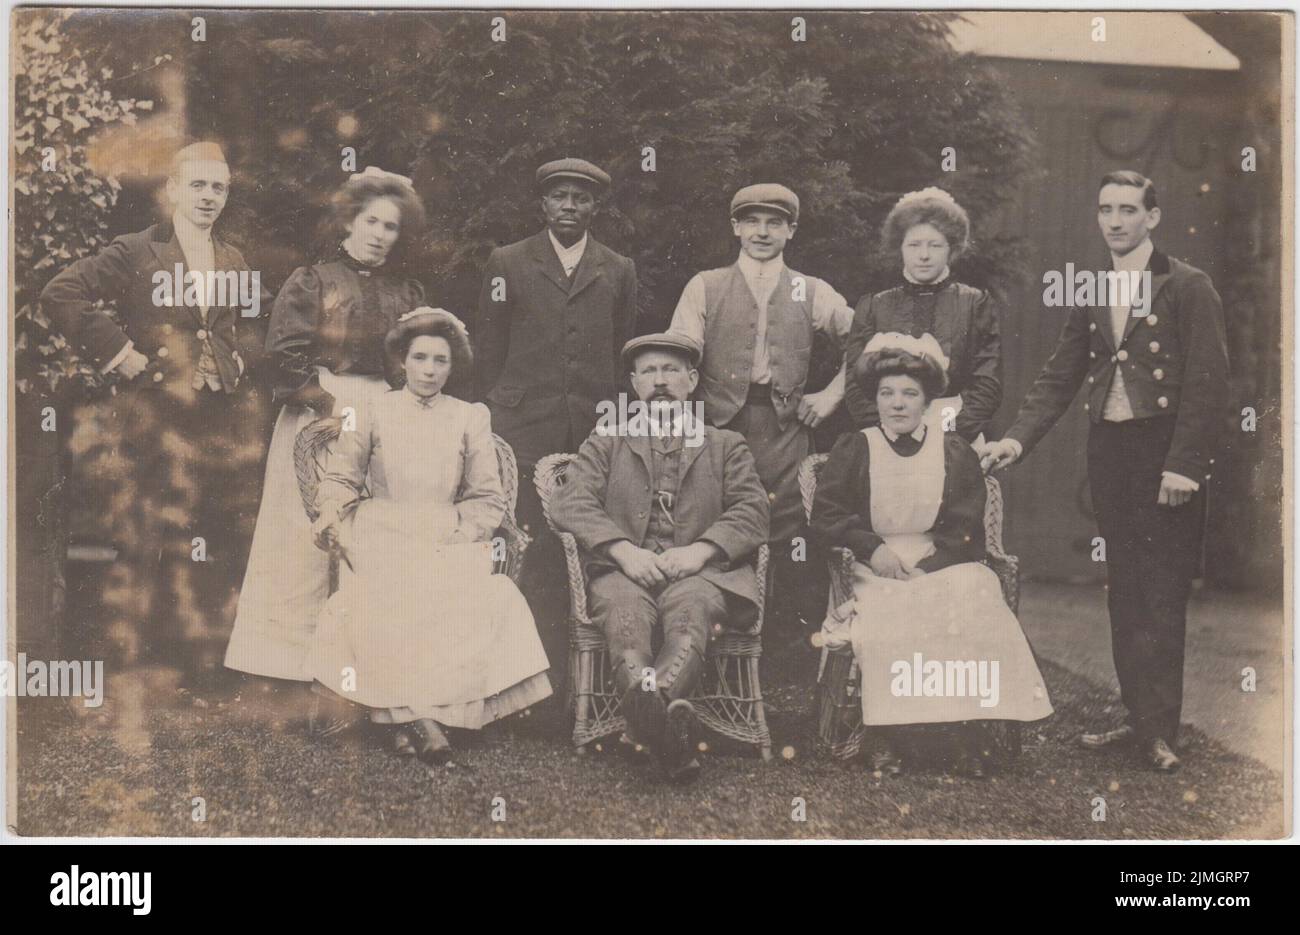 Early 20th century photograph of a group of servants posing for the camera in a garden. The servants include four maids in uniforms, two men in smart buttoned jackets (footmen?), and three men in suits and flat caps. One of the men is African - Caribbean or Black British Stock Photo